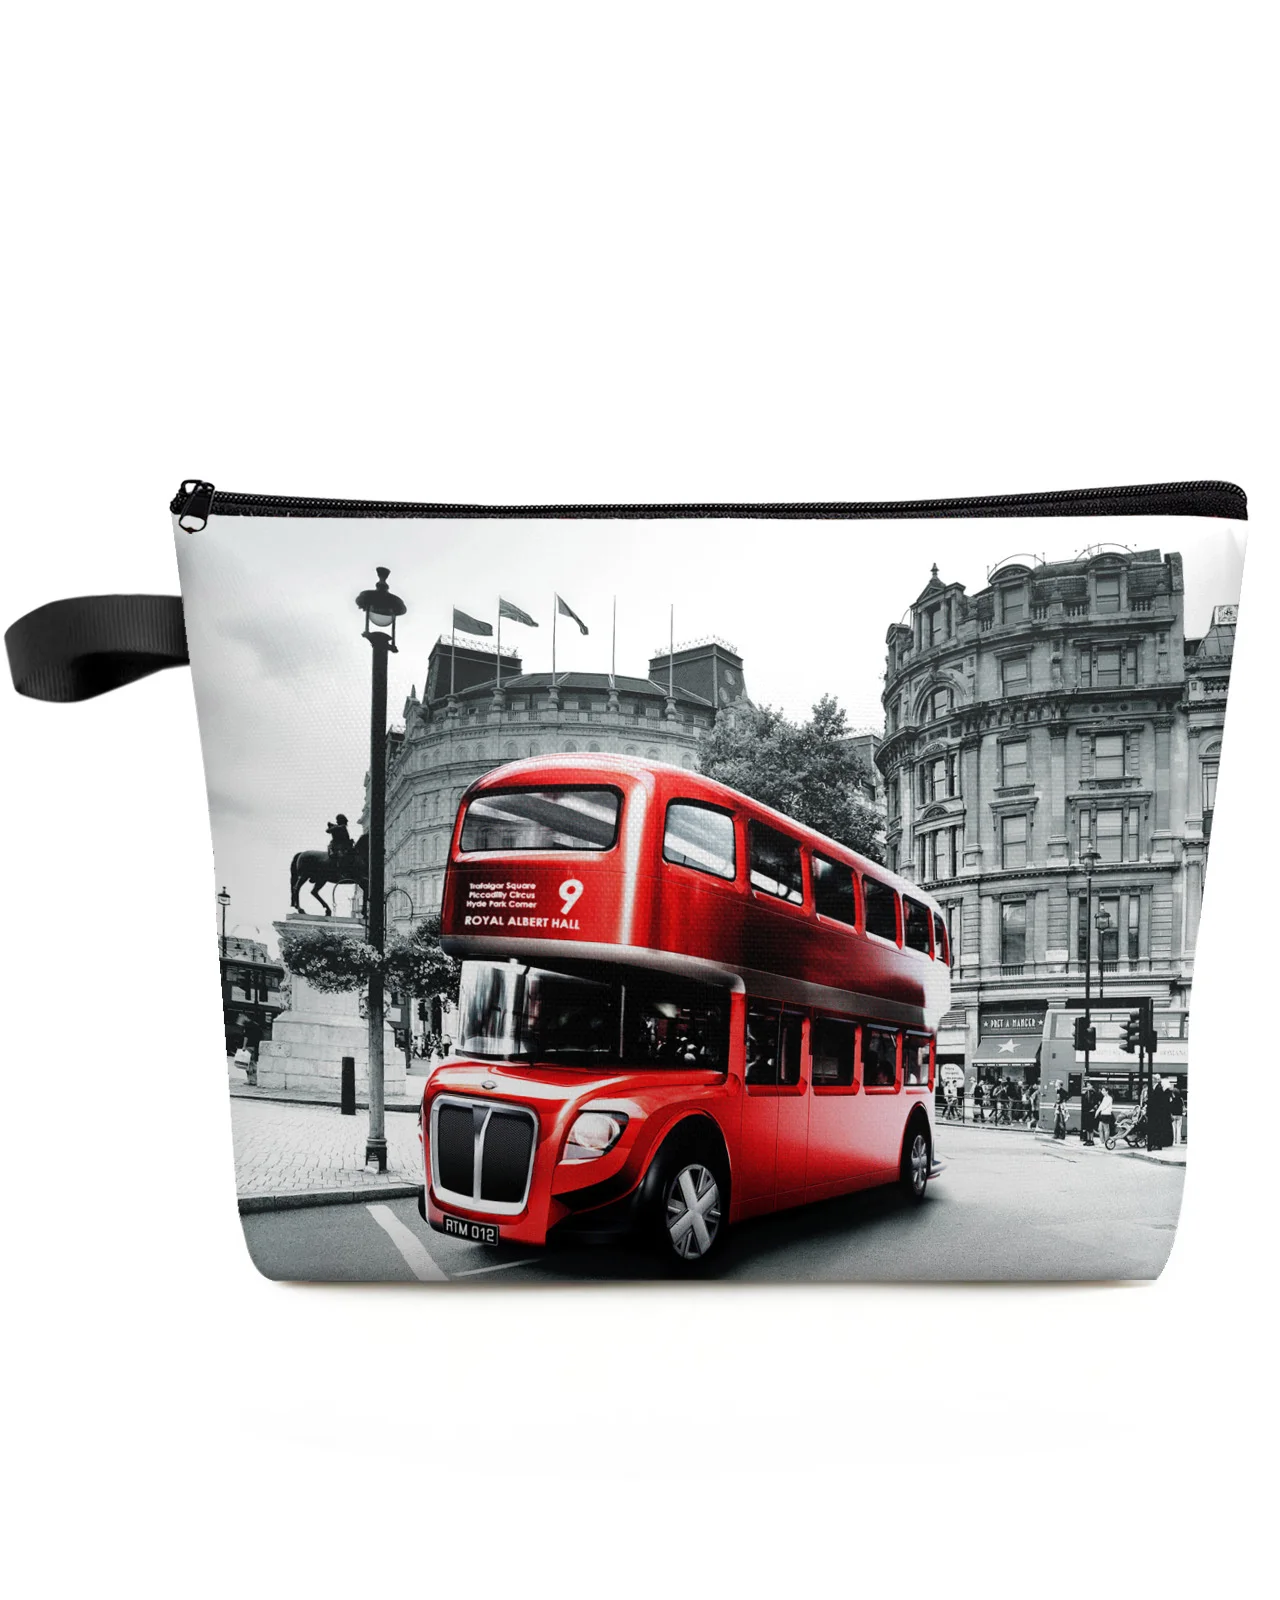 

Red bus London street scenery Large Capacity Travel Cosmetic Bag Portable Makeup Storage Pouch Women Waterproof Pencil Case